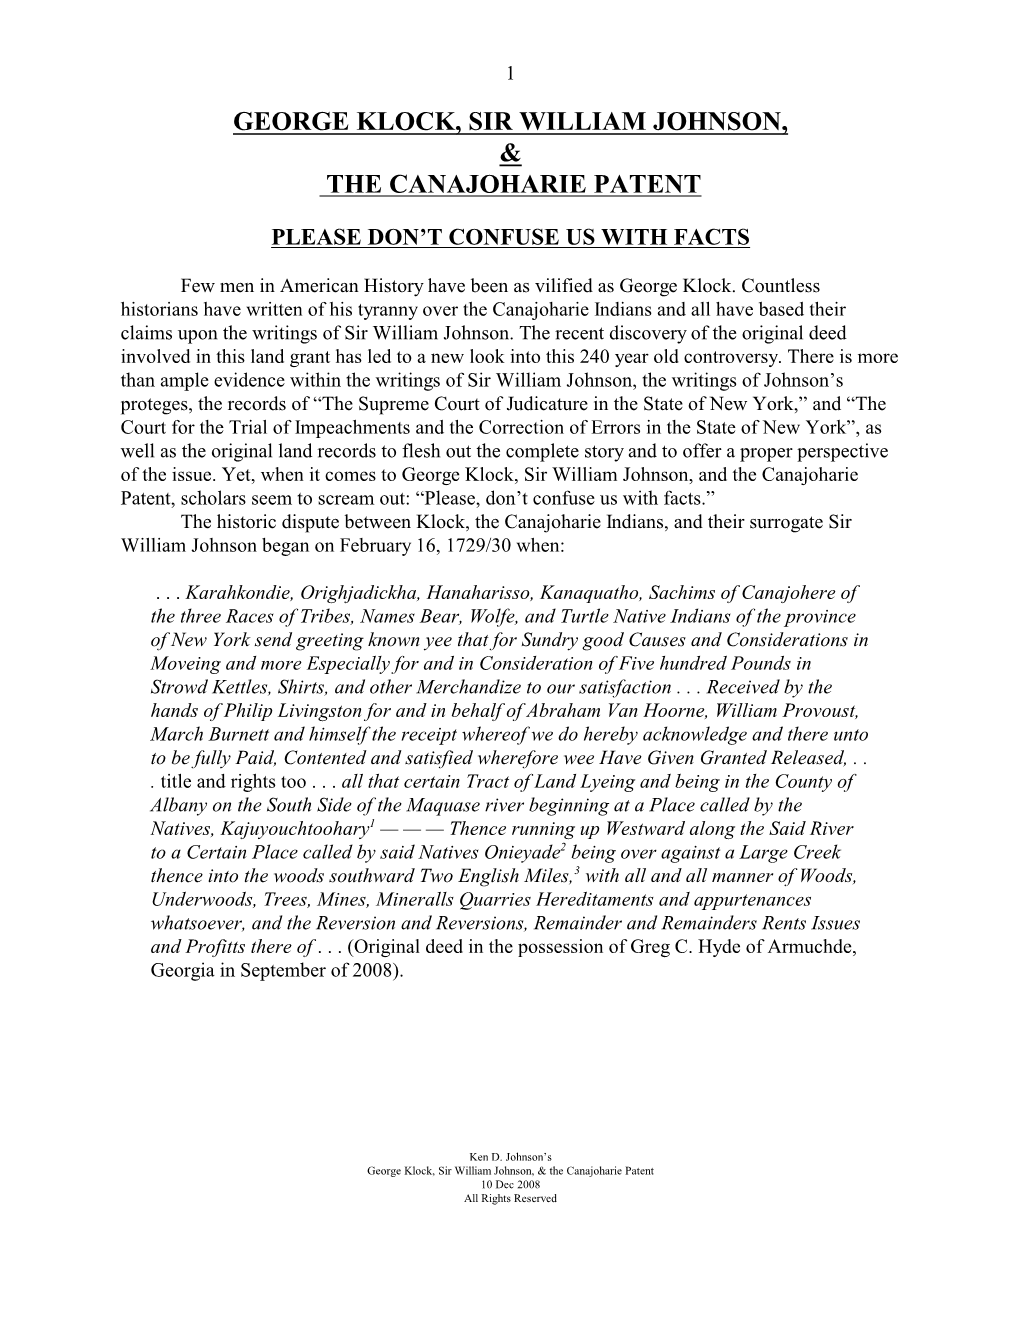 The Canajoharie Patent